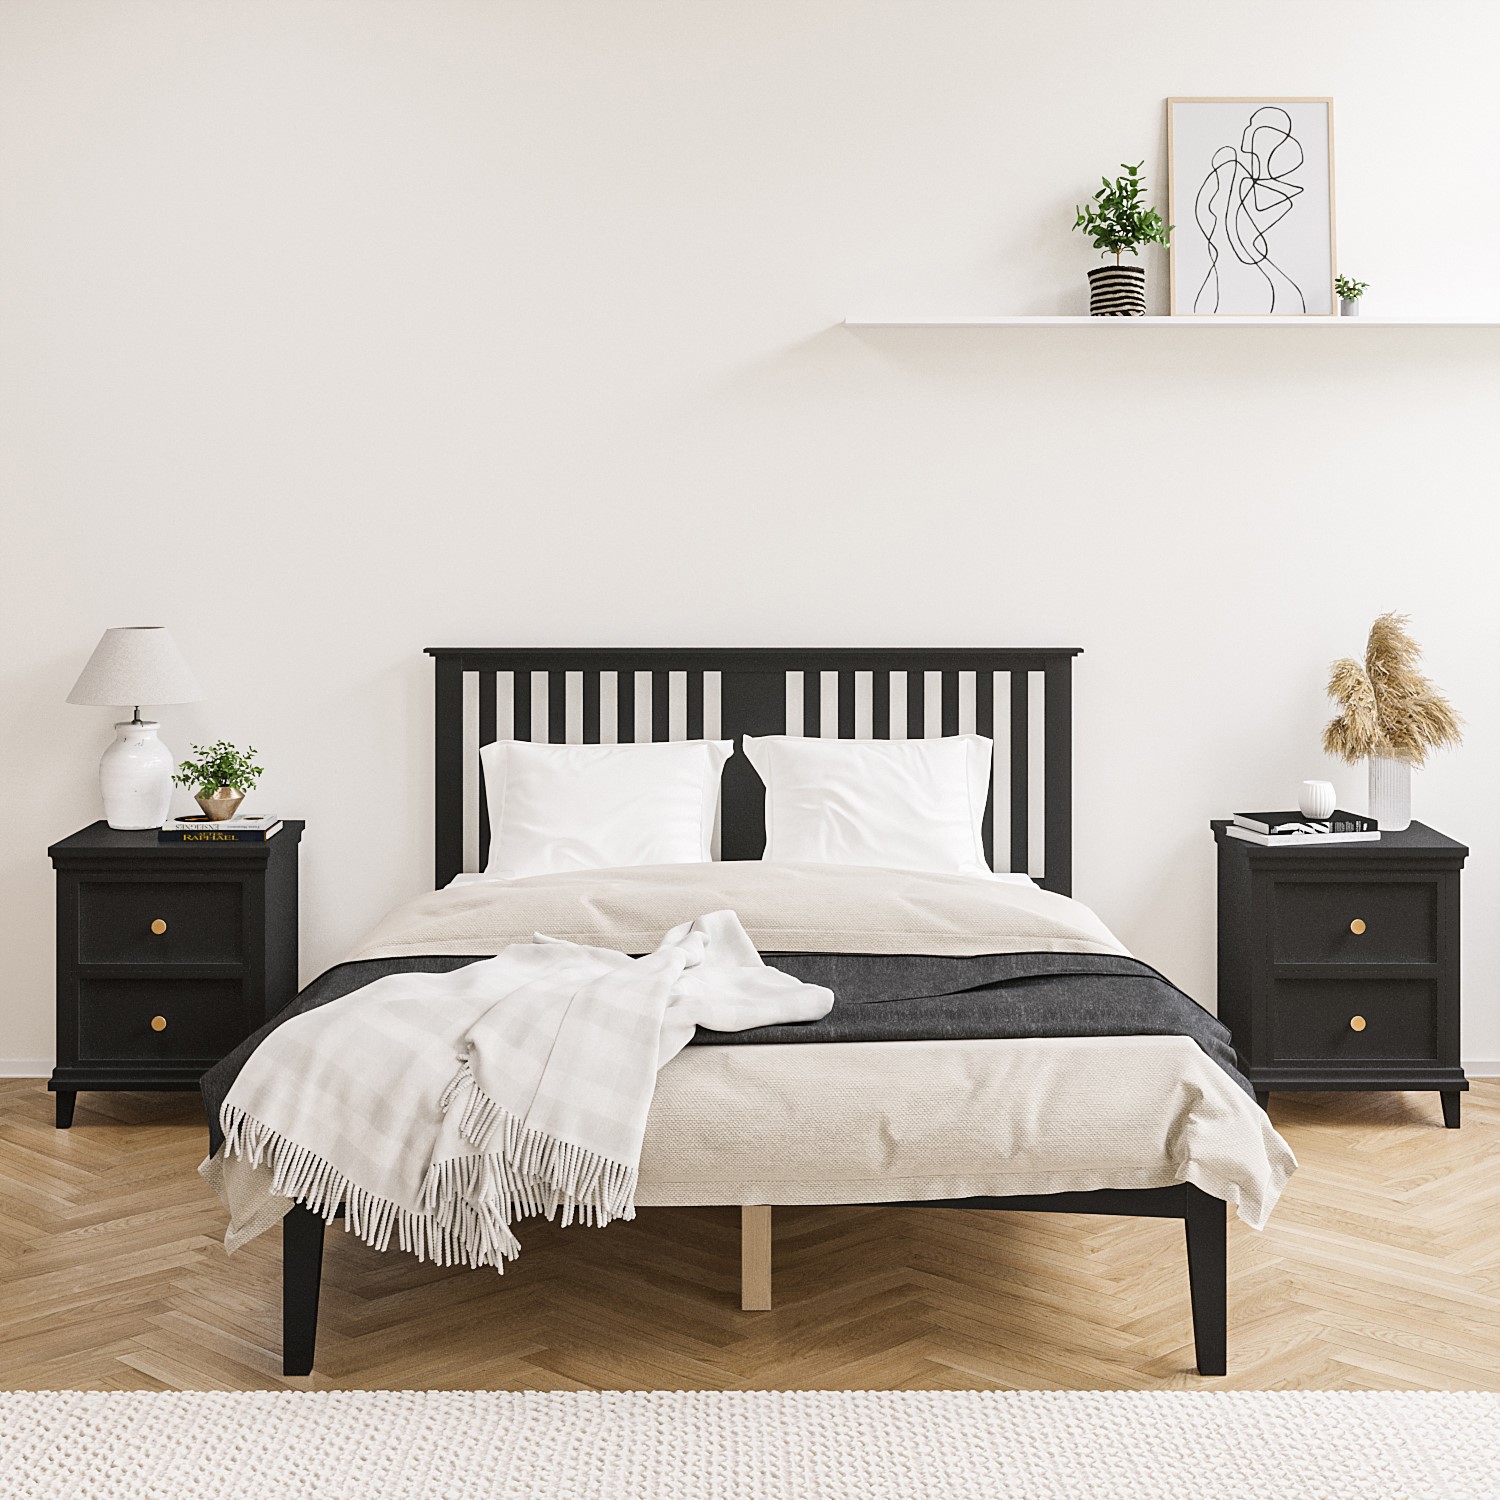 Read more about Black wooden king size bed frame with headboard charlie